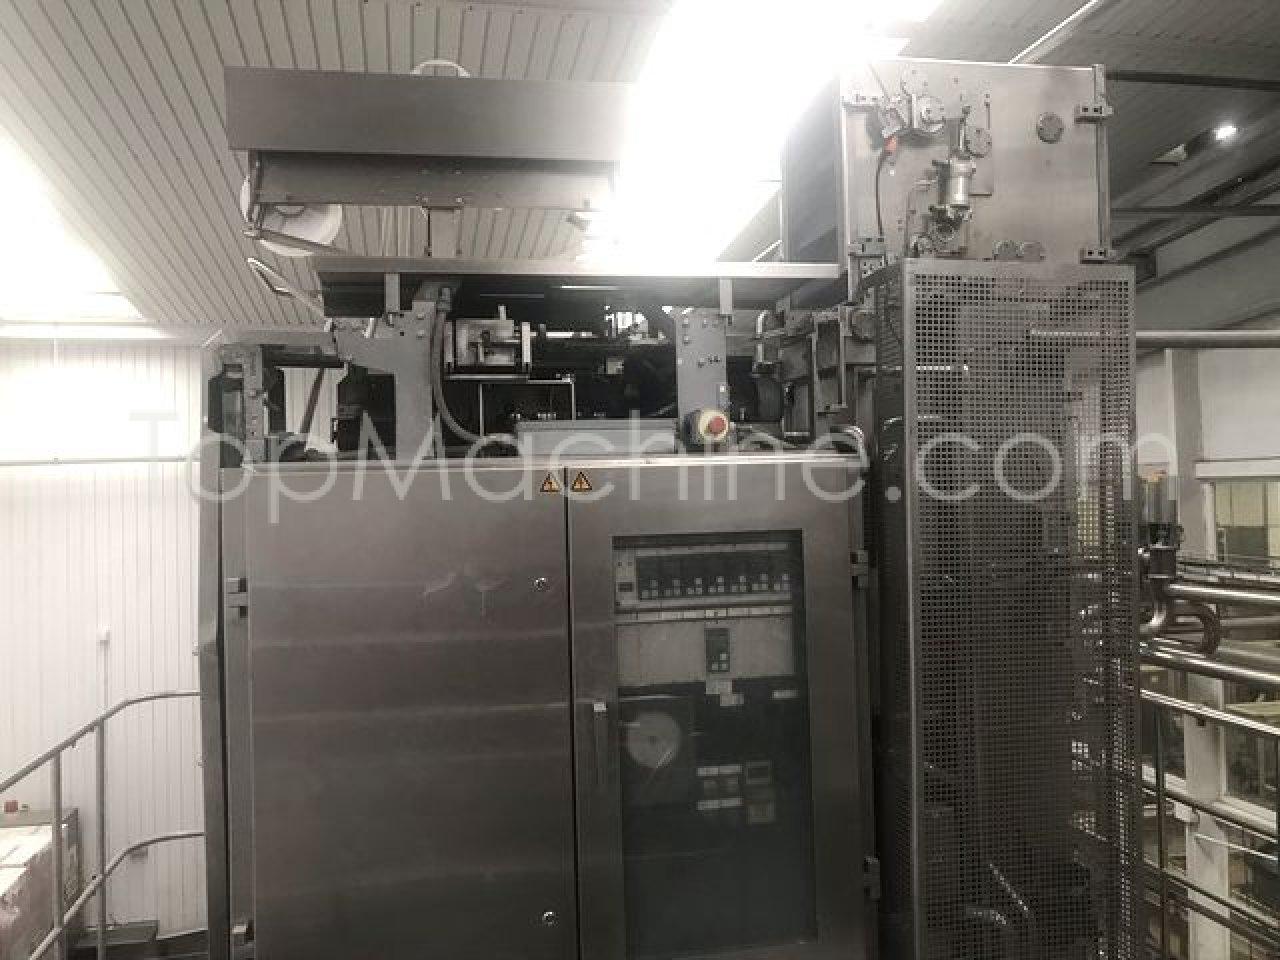 Used Tetra Pak TBA 8 1000 Base Dairy & Juices Aseptic filling